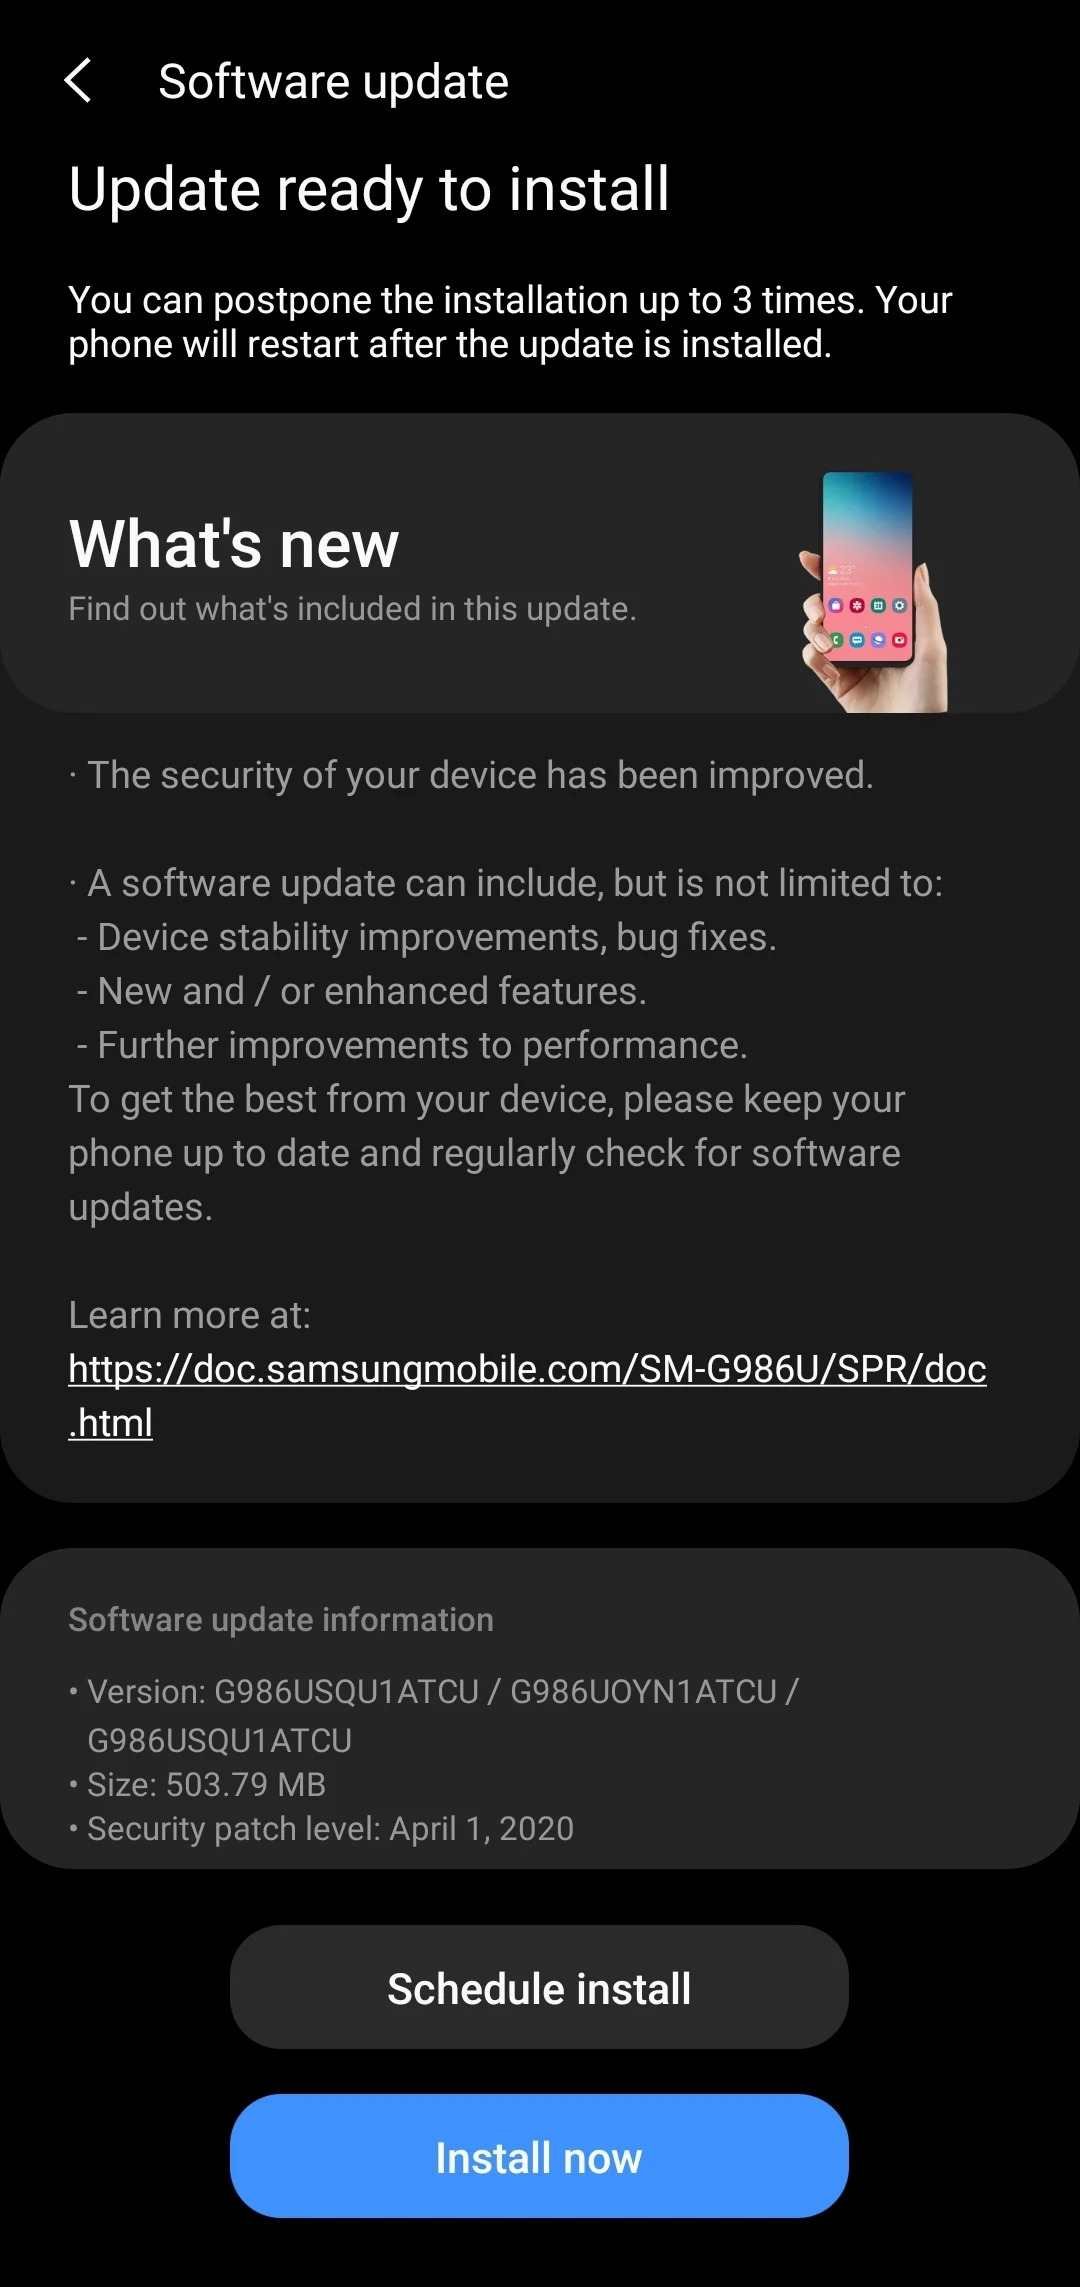 April security patch for Galaxy S20, S20+, and S20 ultra.